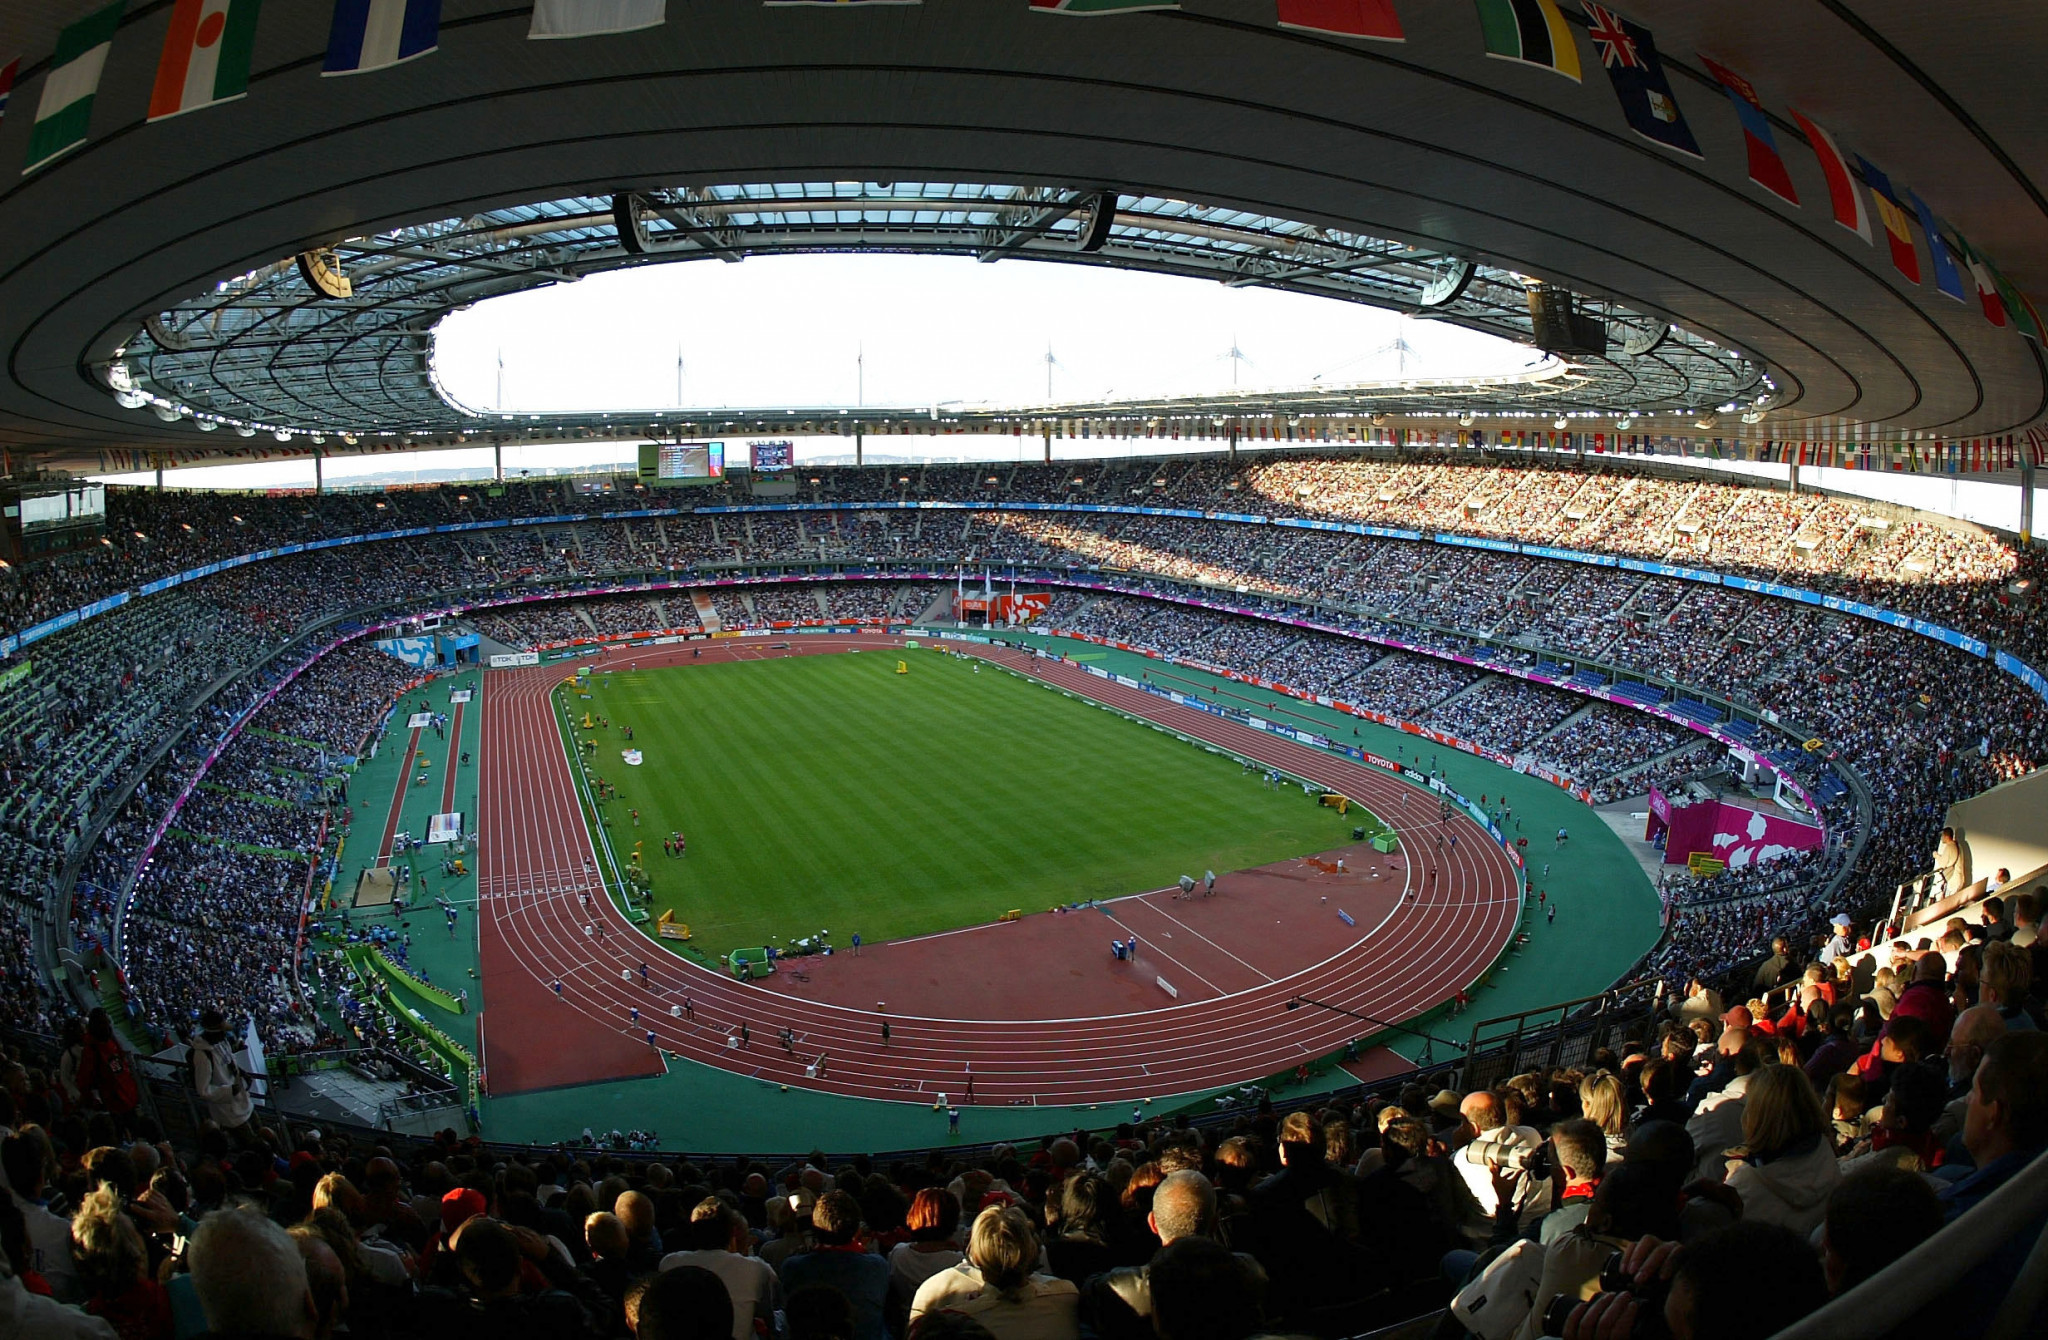 The Stade de France, the usual Top 14 final venue, is set to be converted to an athletics venue for the Paris 2024 Olympics and Paralympics ©Getty Images